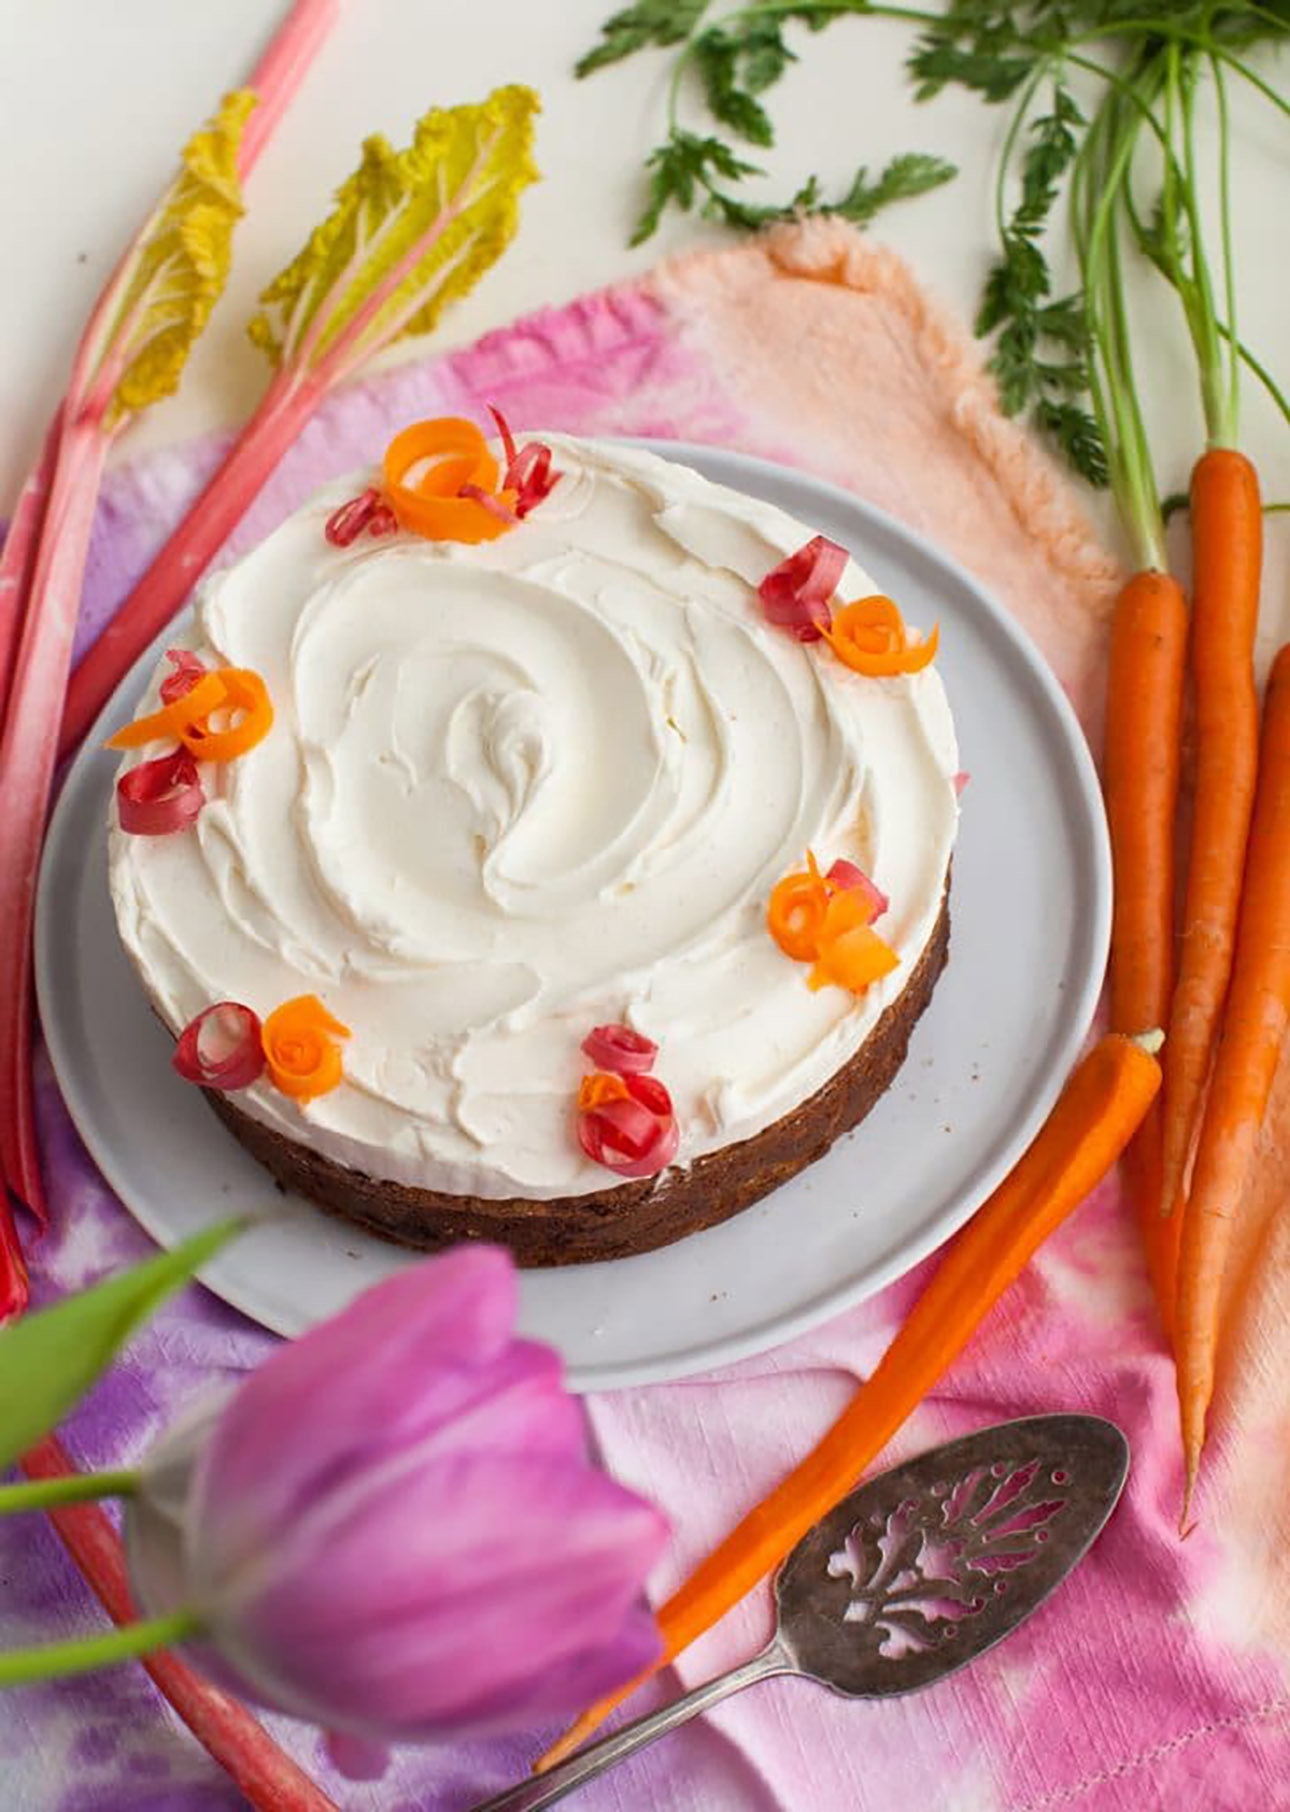 Rhubarb Carrot Cake with Vanilla Mascarpone Frosting by Simple Bites // 15 Rhubarb Dessert Recipes for Spring